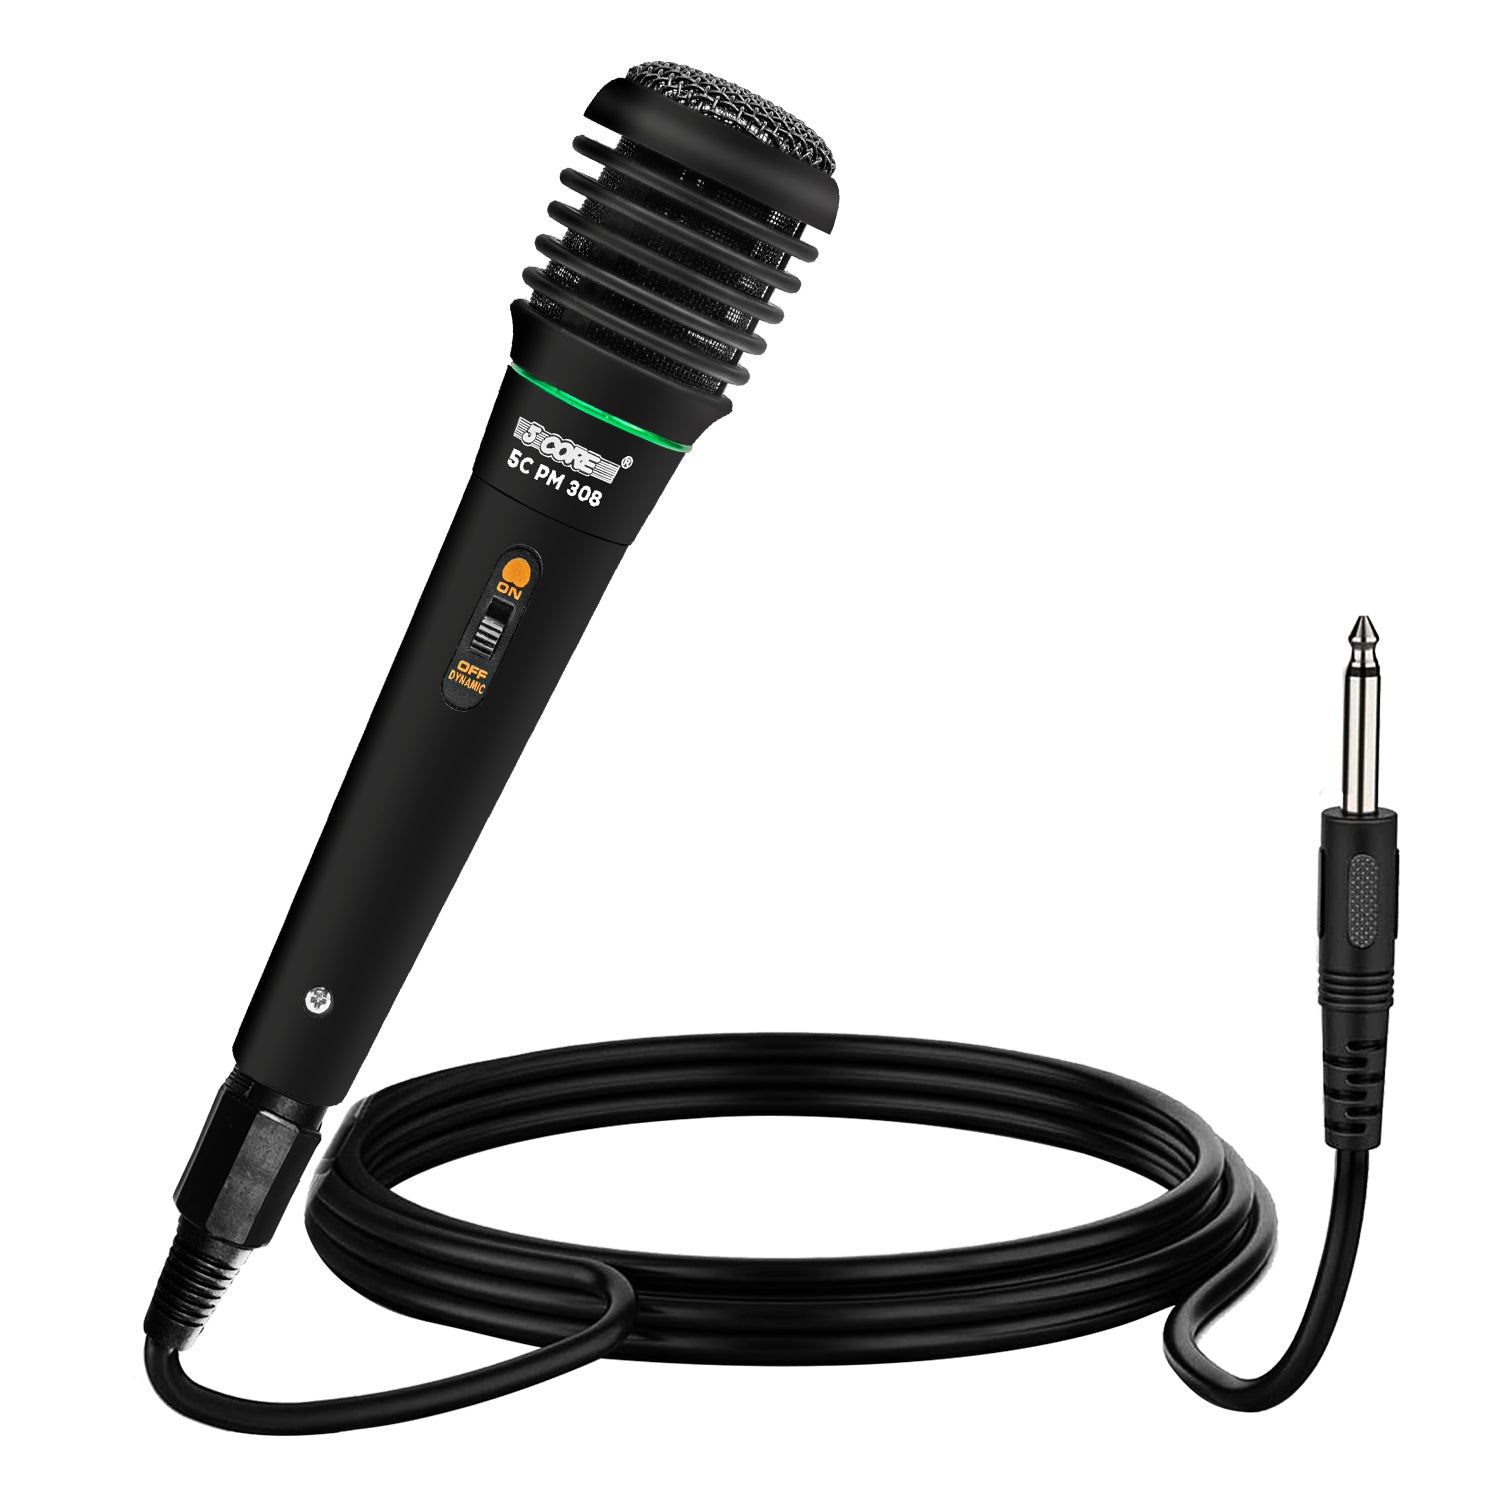 5 Core Microphone 1 Piece Black Karaoke XLR Wired Mic Professional Studio Microfonos w Integrated Pop Filter Dynamic Moving Coil Cardioid Unidirectional Pickup Micrófono for Singing DJ Podcast Speeches Includes Cable - 308P